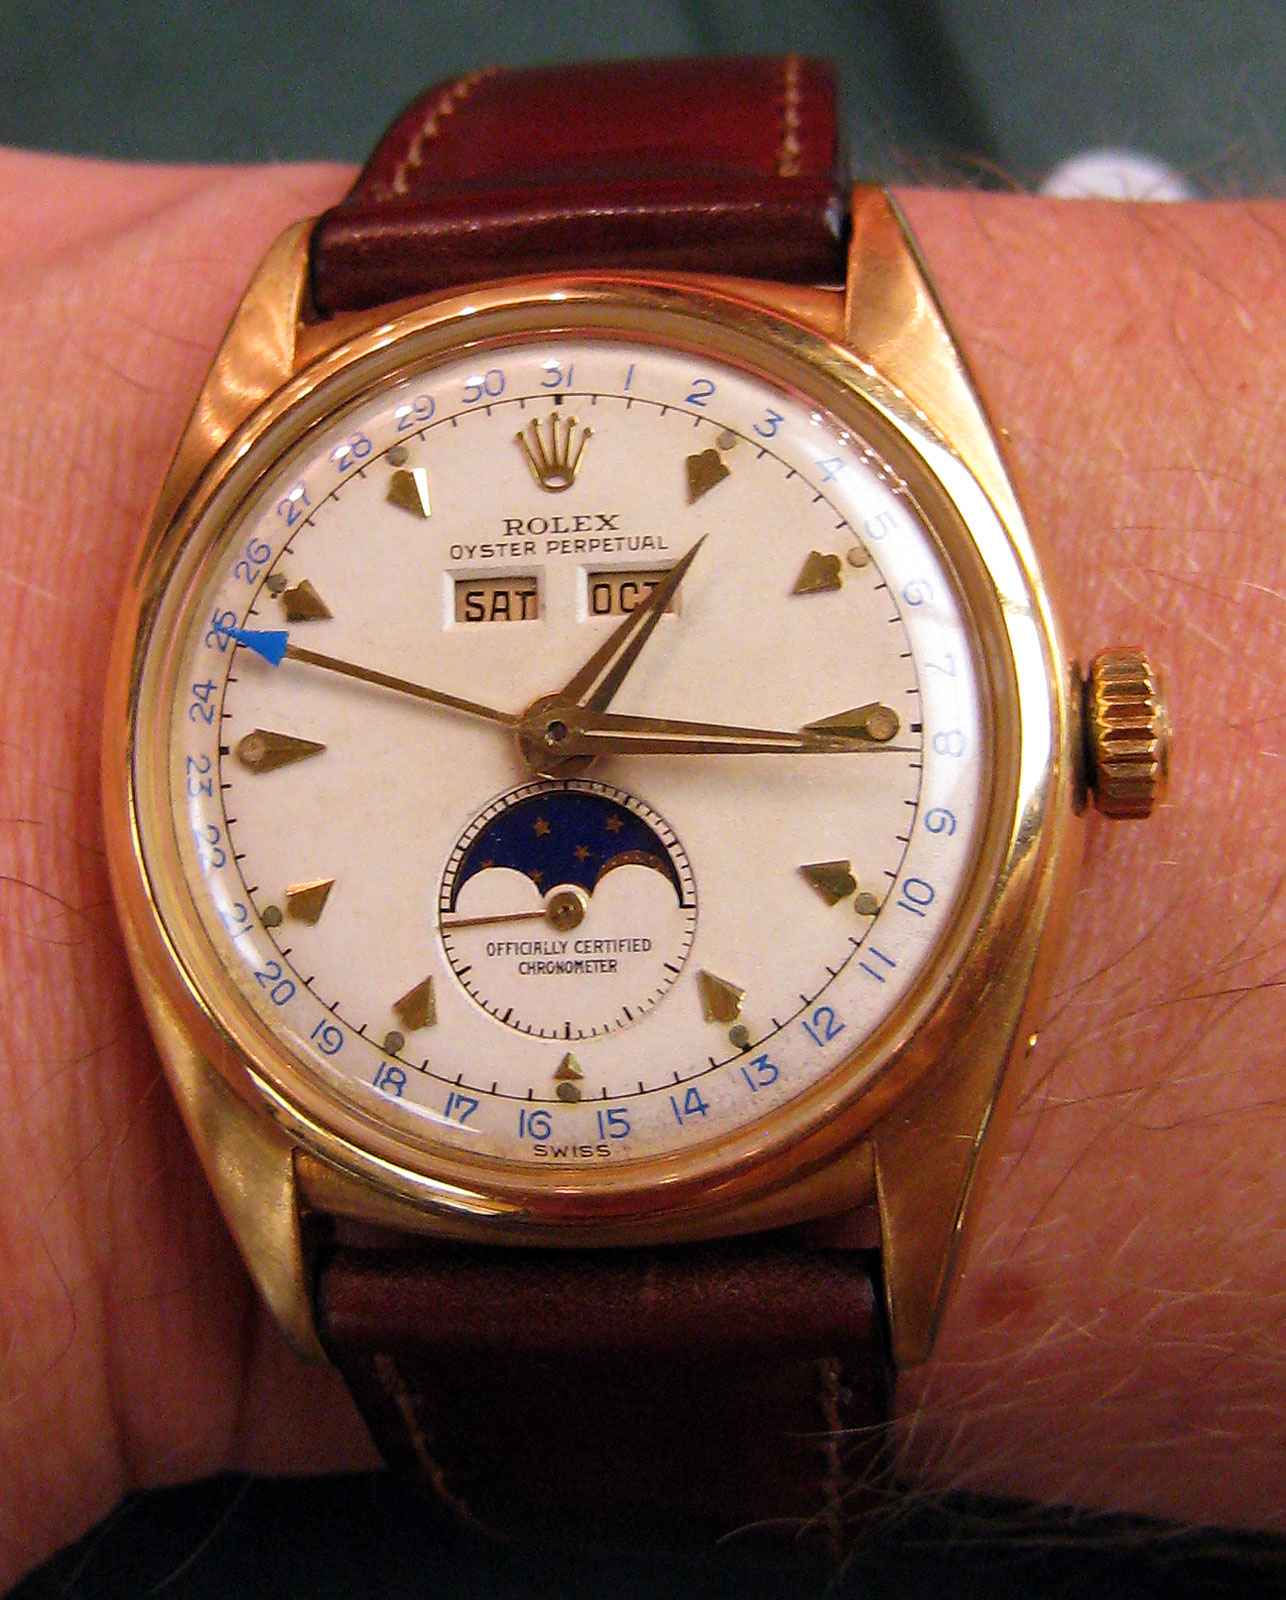 of vintage Rolex watches. I mean it is like going to a Rolex ...